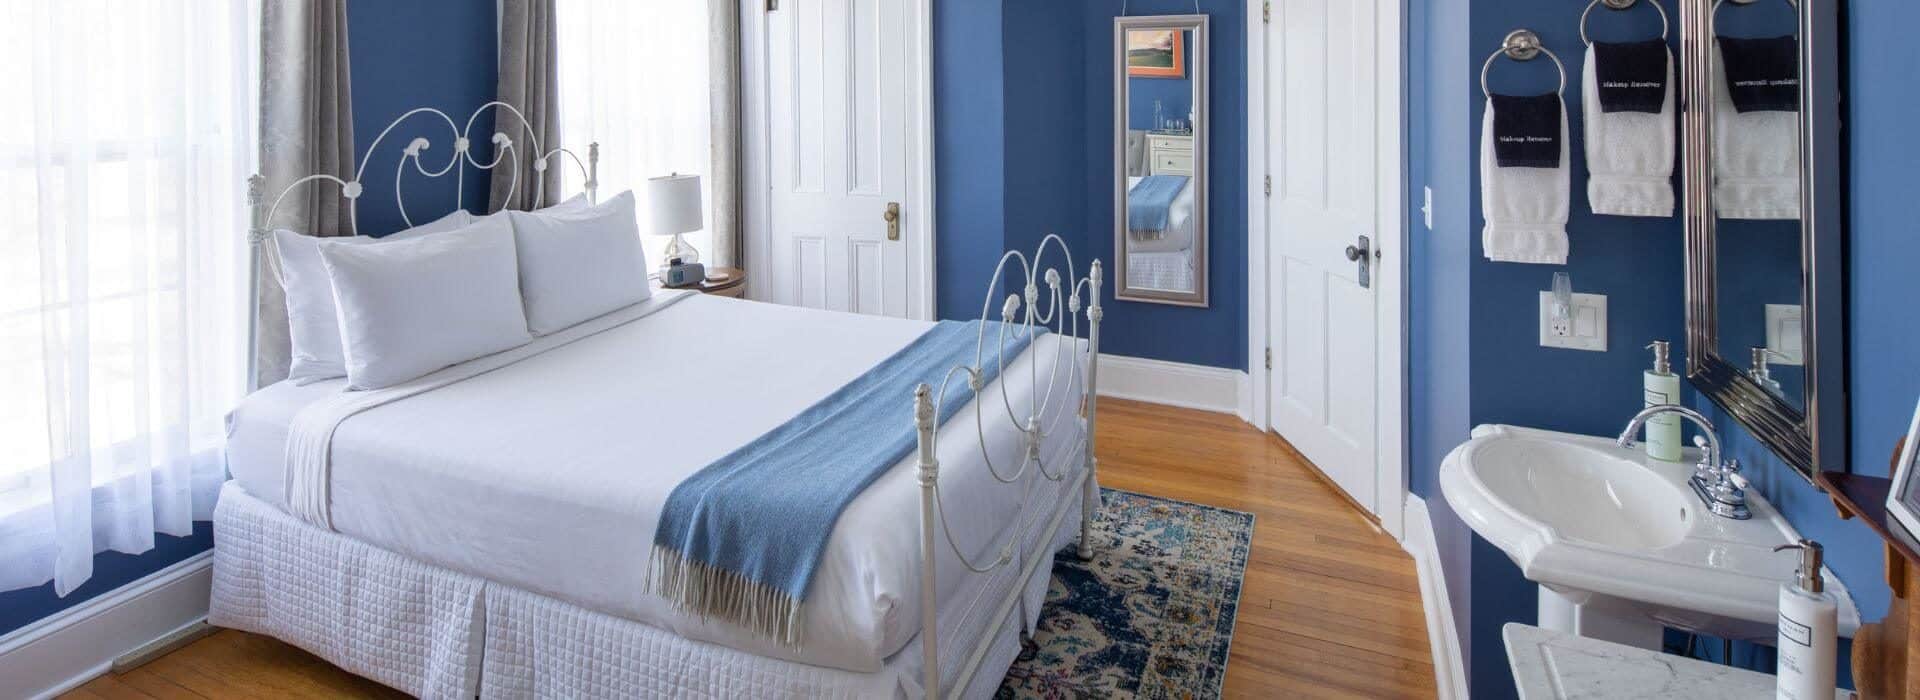 Bedroom with wood floors, blue walls with white trim and doors, a wrought iron bed with white and blue linens, a tapestry rug, and pedestal sink with mirror.